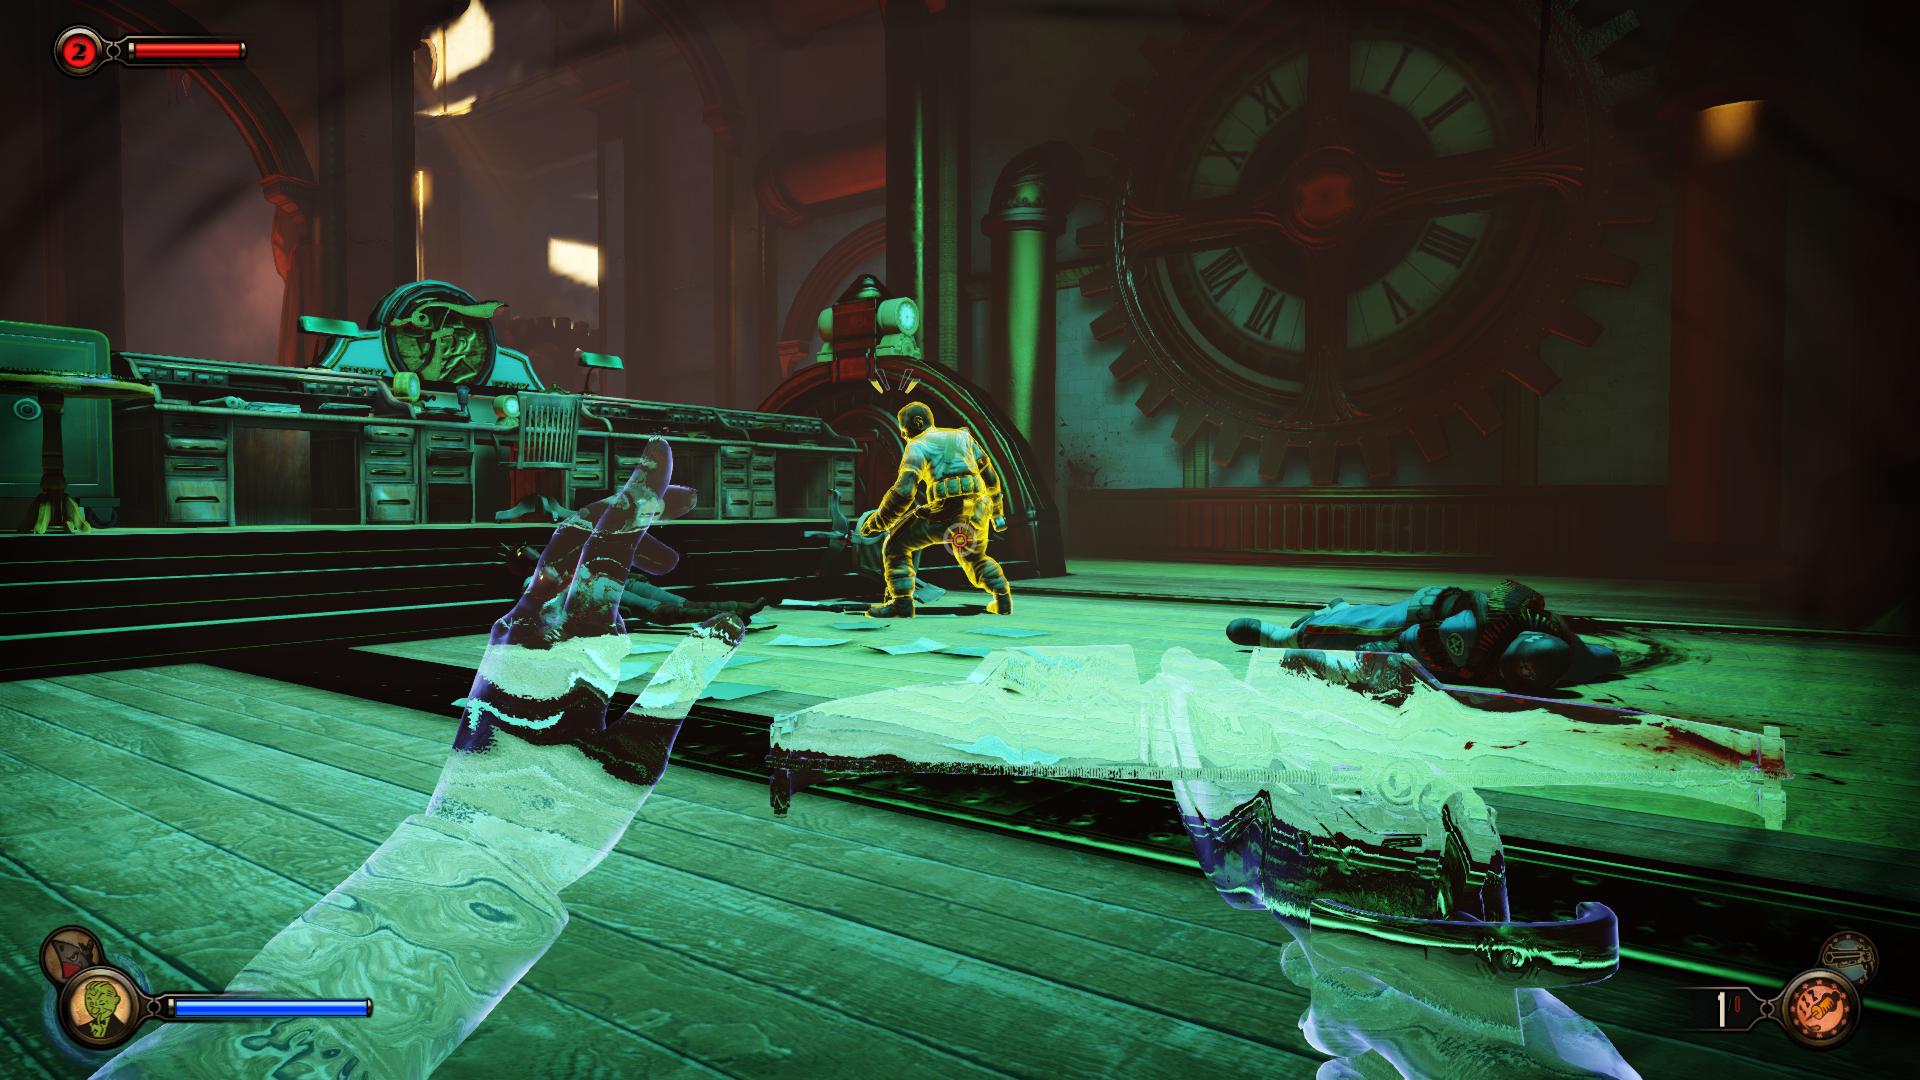 BioShock Infinite: Burial at Sea – Episode Two Available March 25th